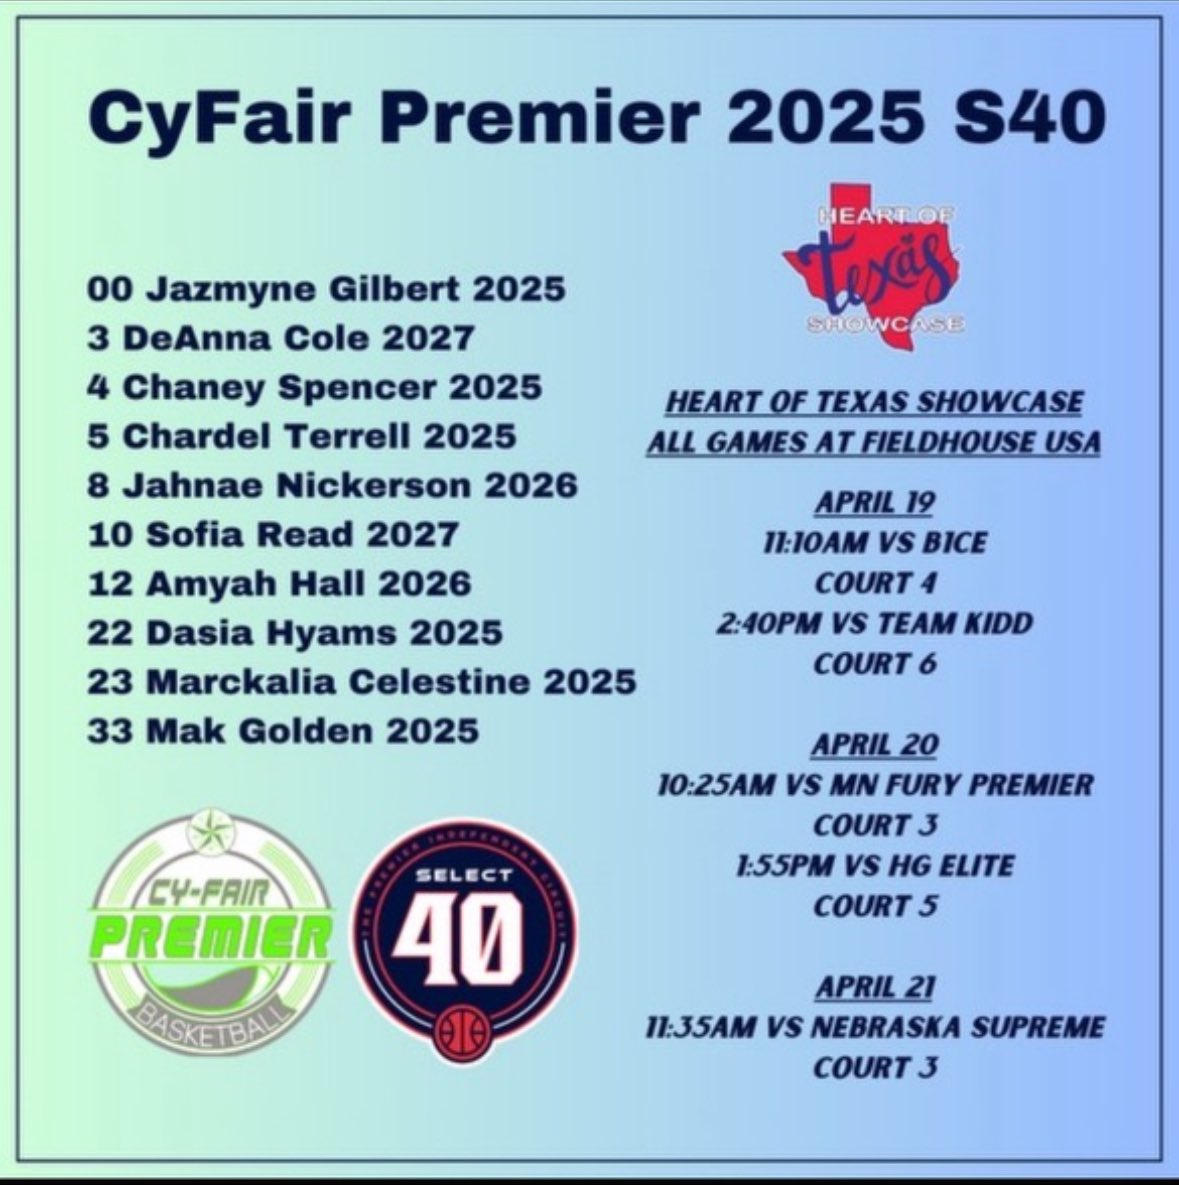 We’ll be at the ❤️ of Texas this weekend. @cyfairpremier @PBRhoops